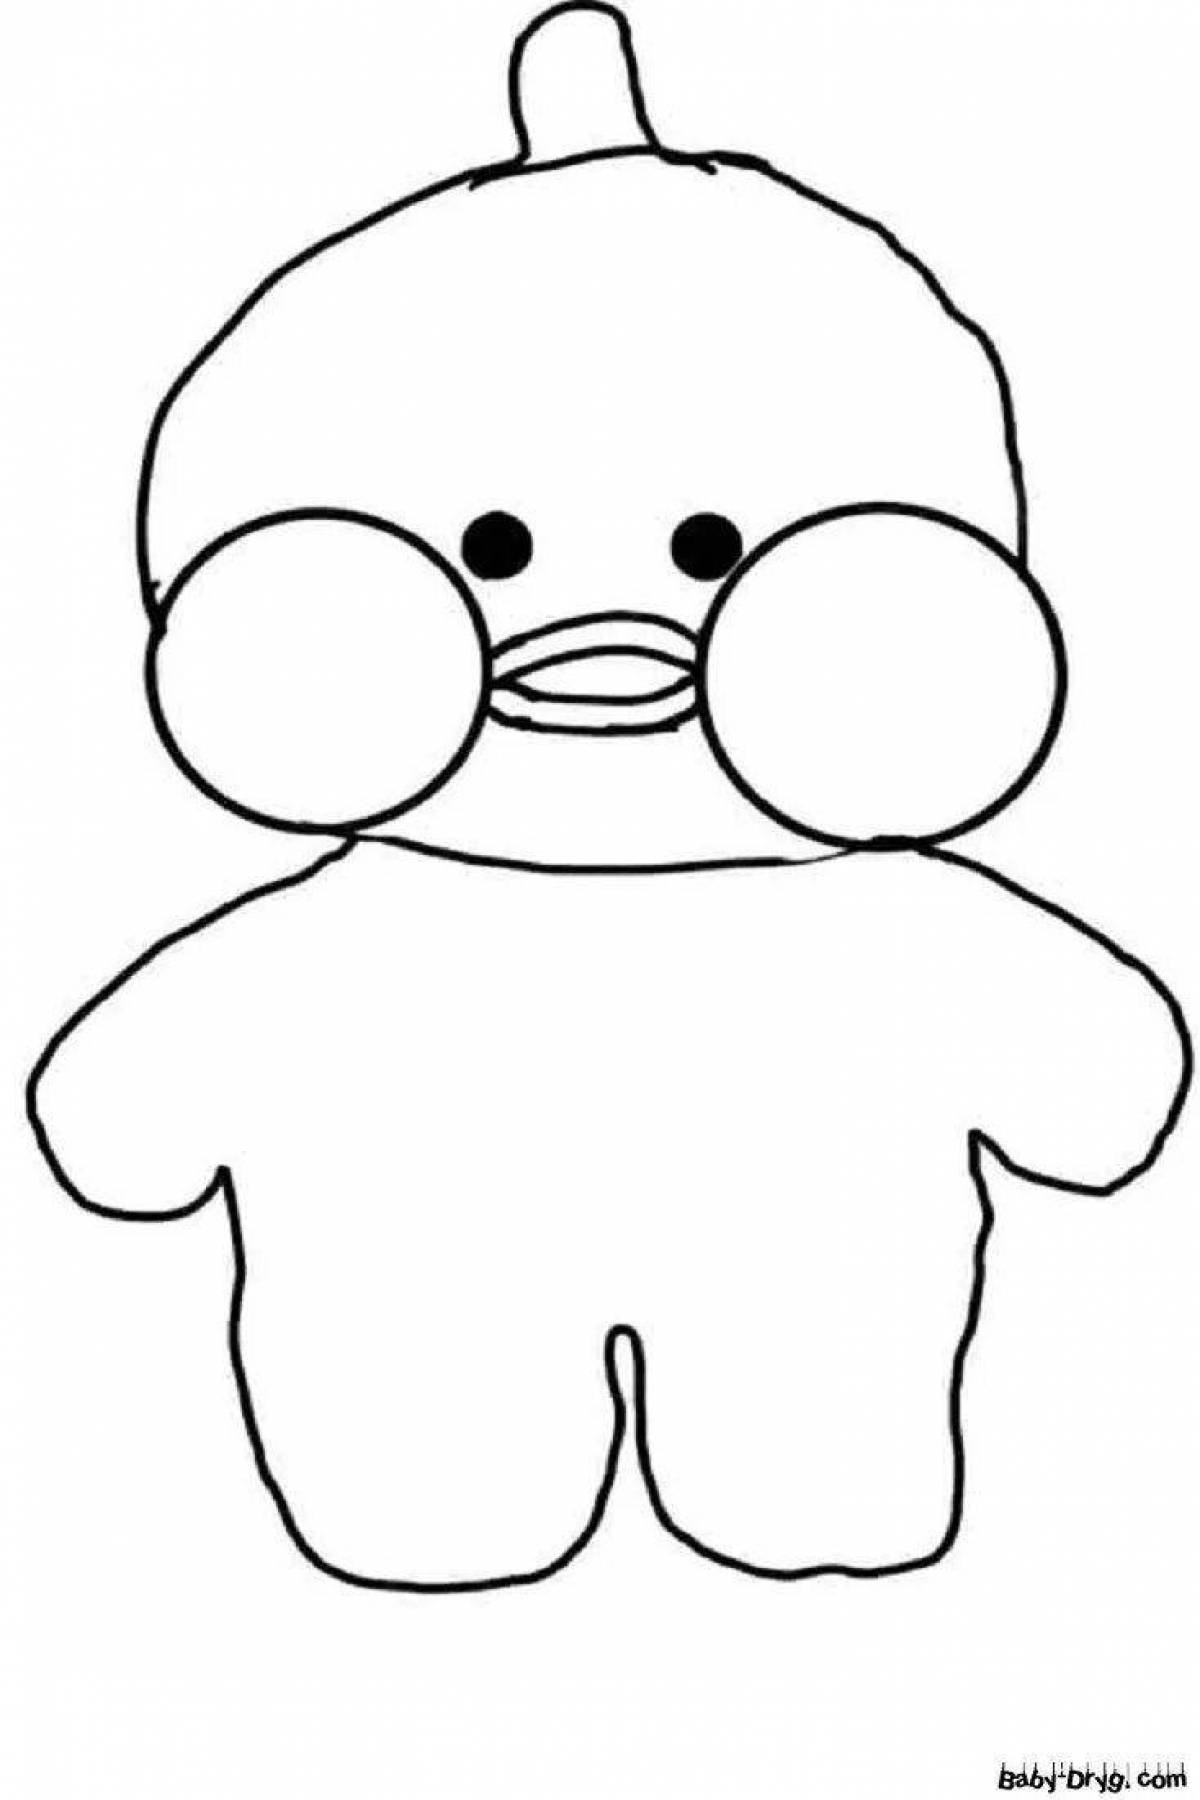 Coloring page adorable dressed duck